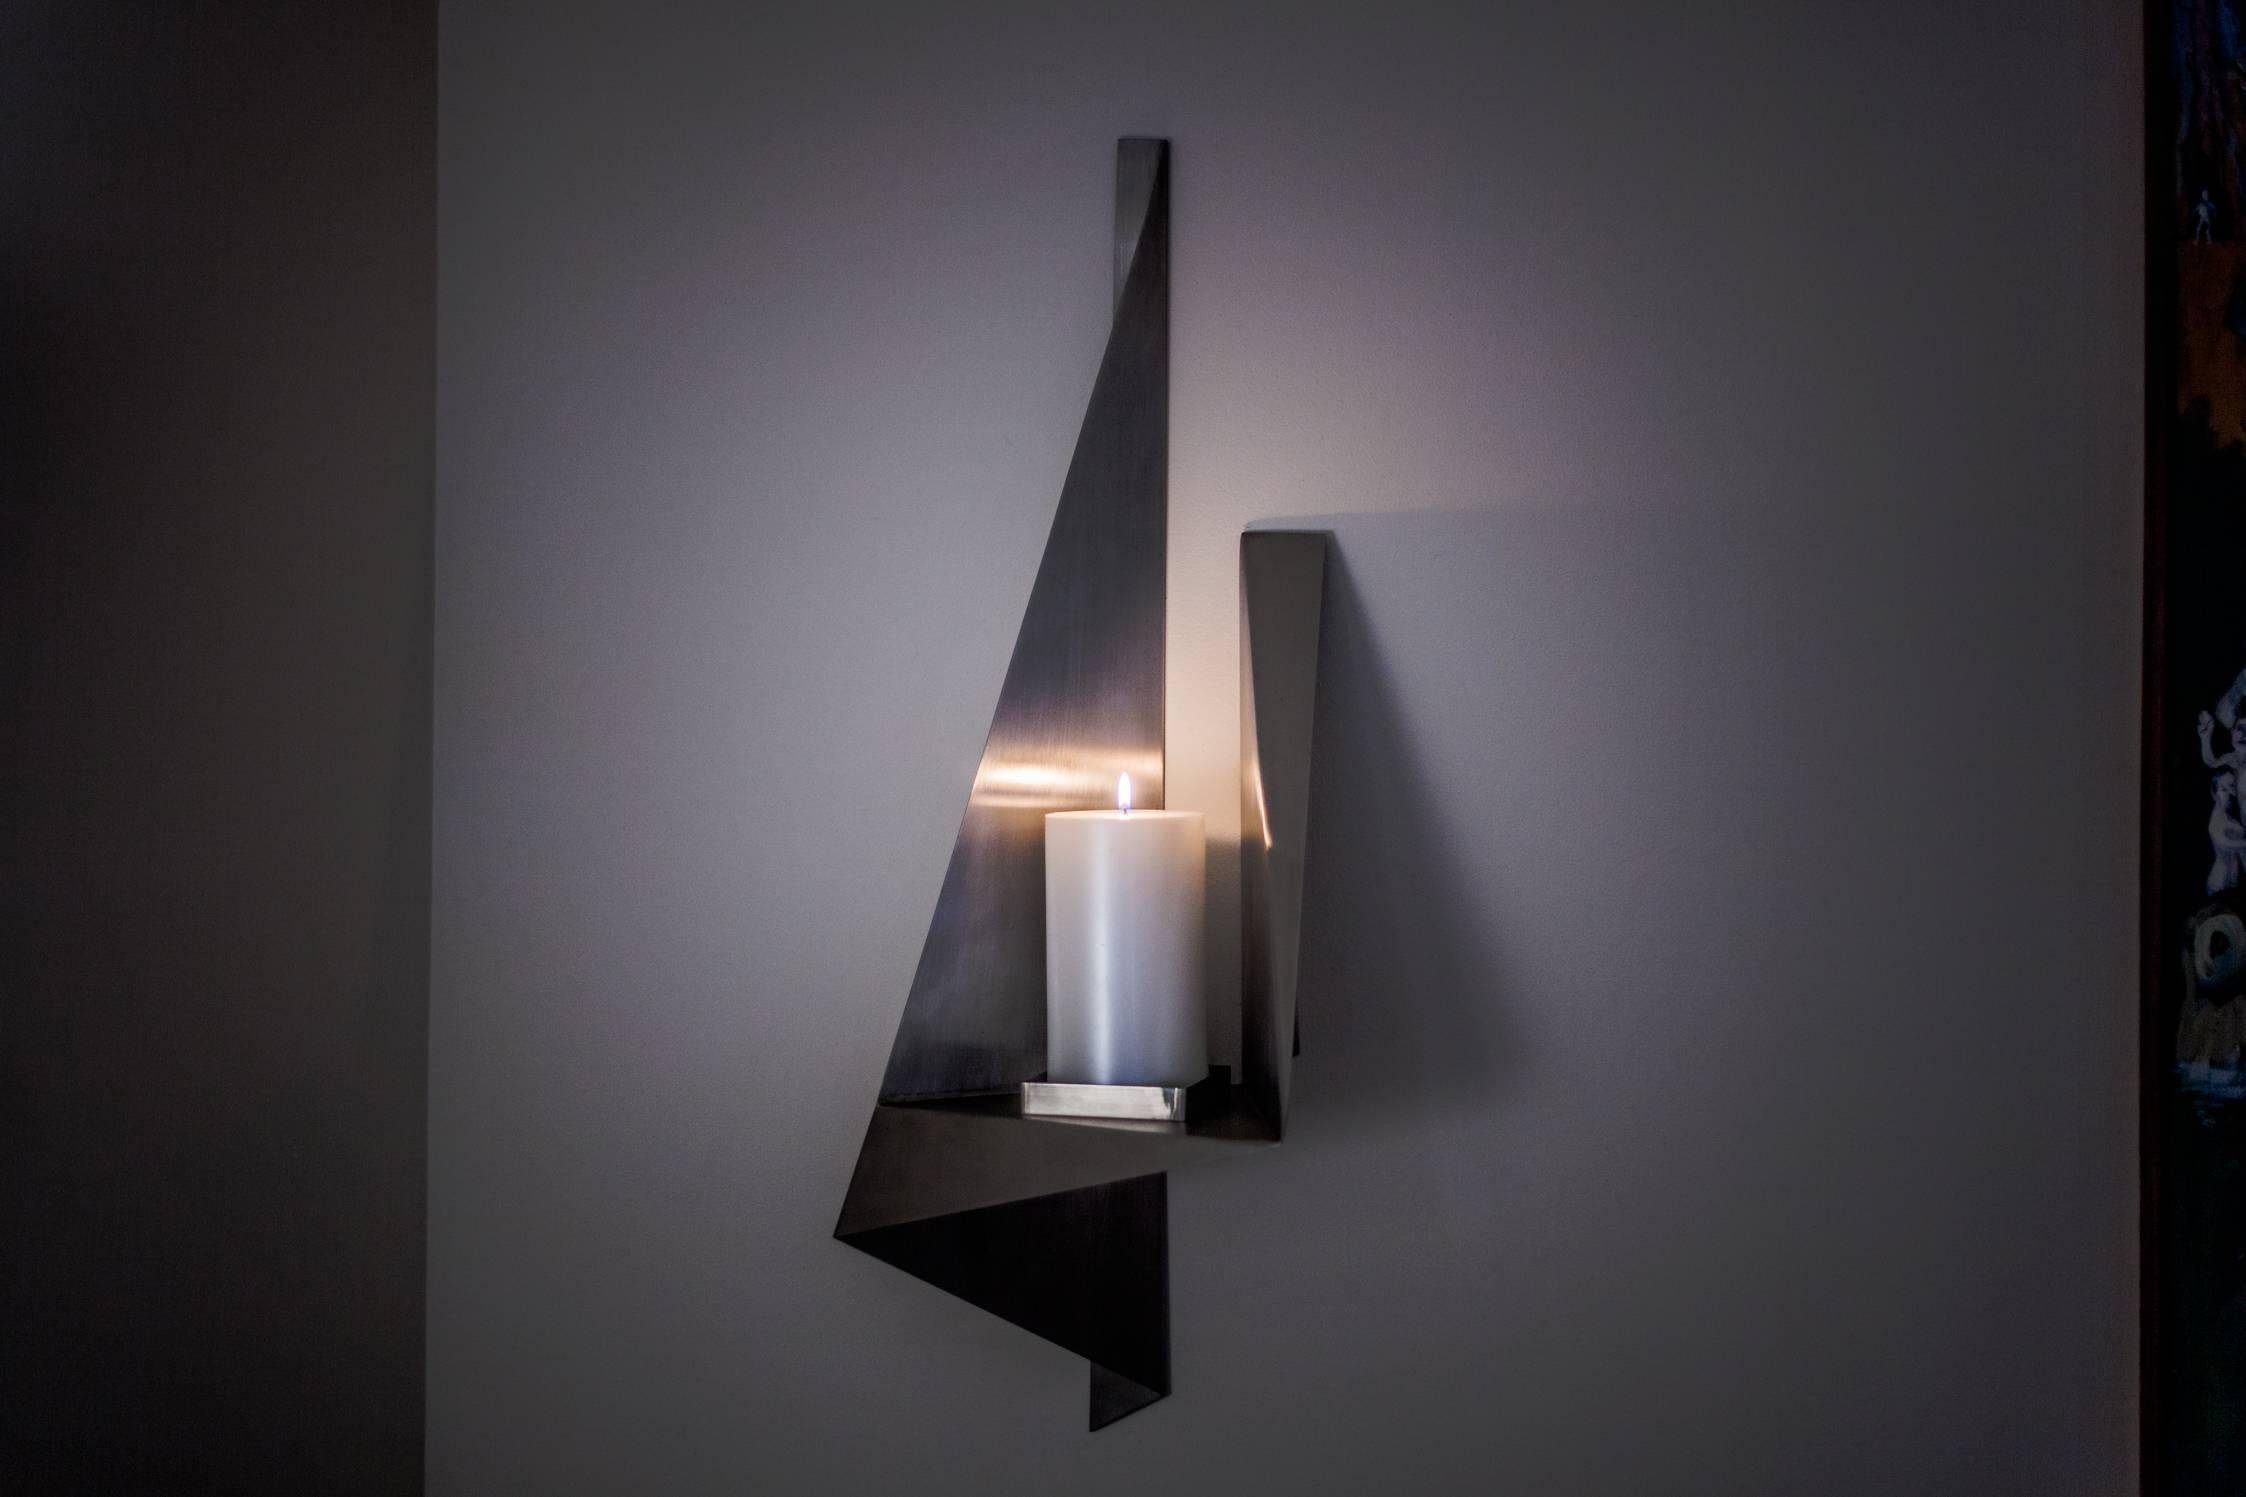 Large, asymmetrical metal wall sconce for pillar candle. This unique, sculptural, vintage wall art is made of stainless steel and reflects light beautifully. A bold and abstract accent piece that draws attention. 